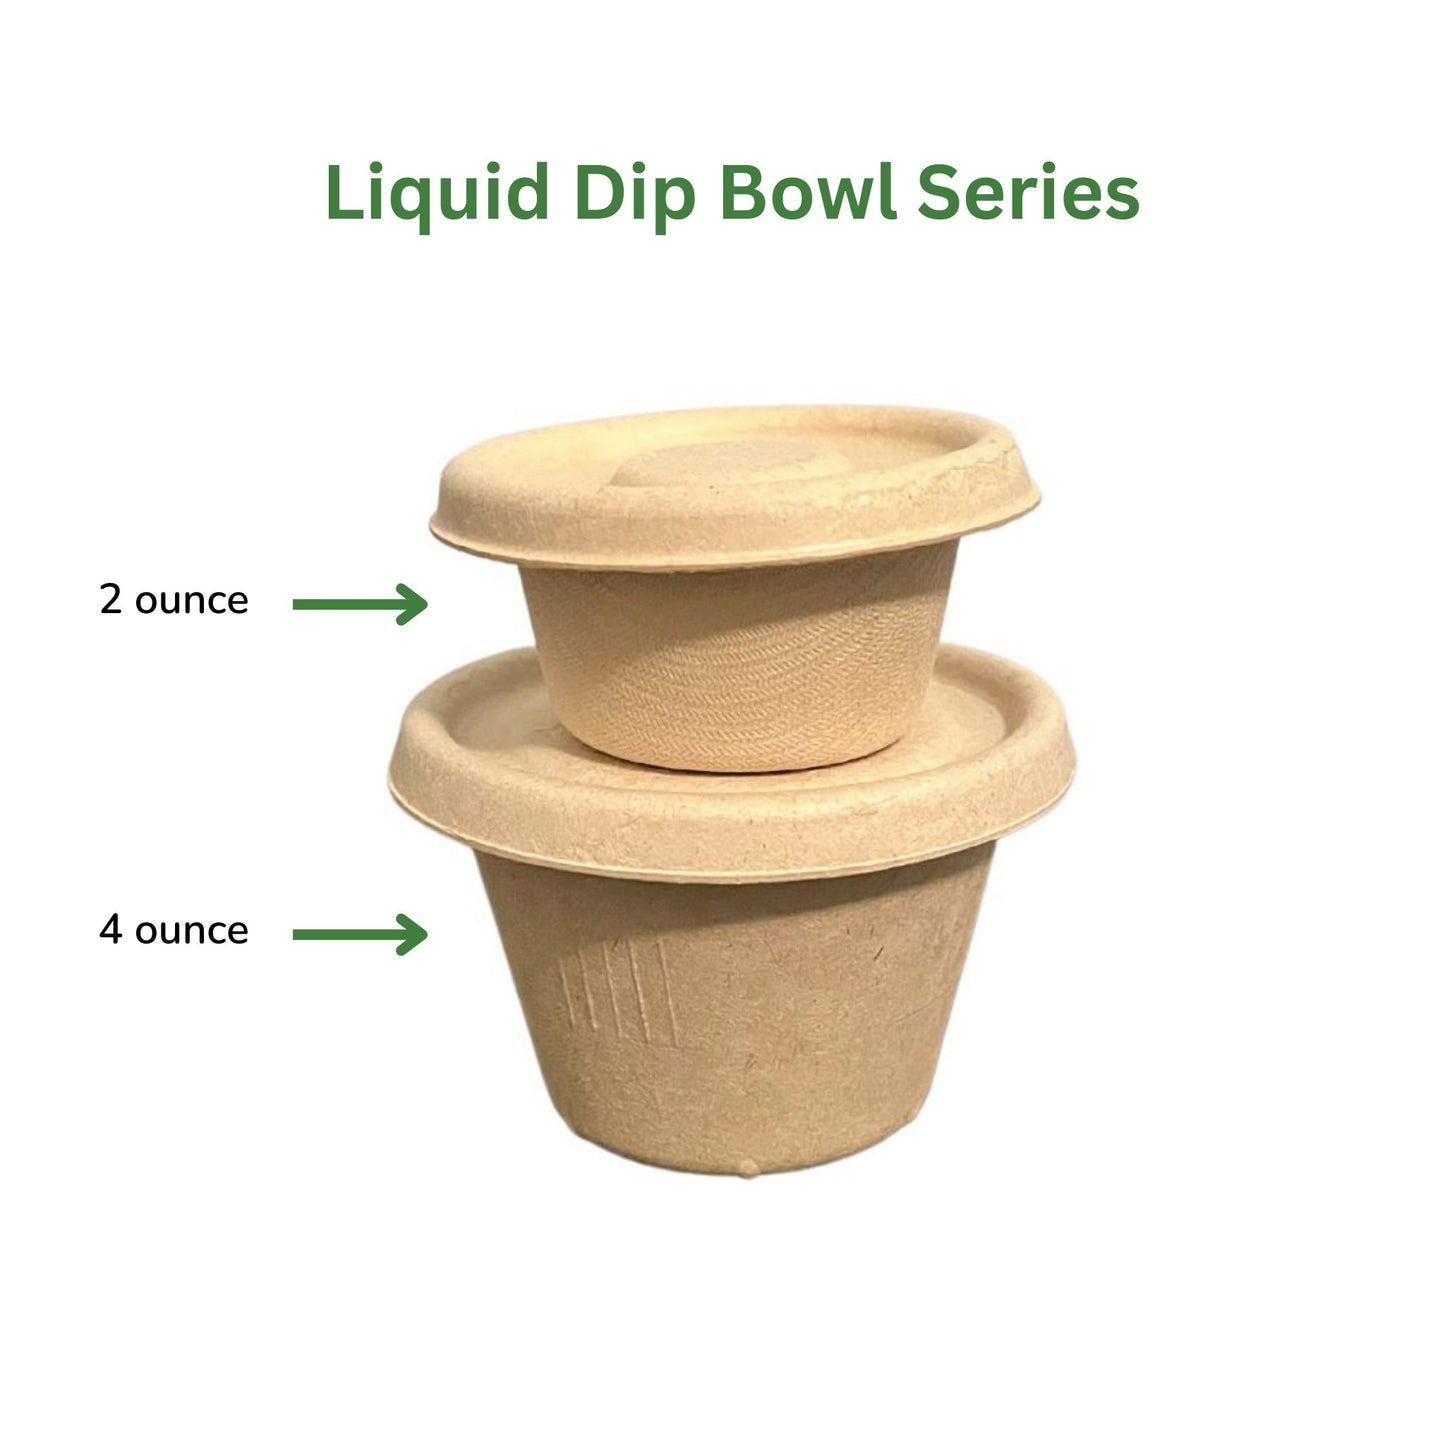 2 ounce biodegradable dip sauce container